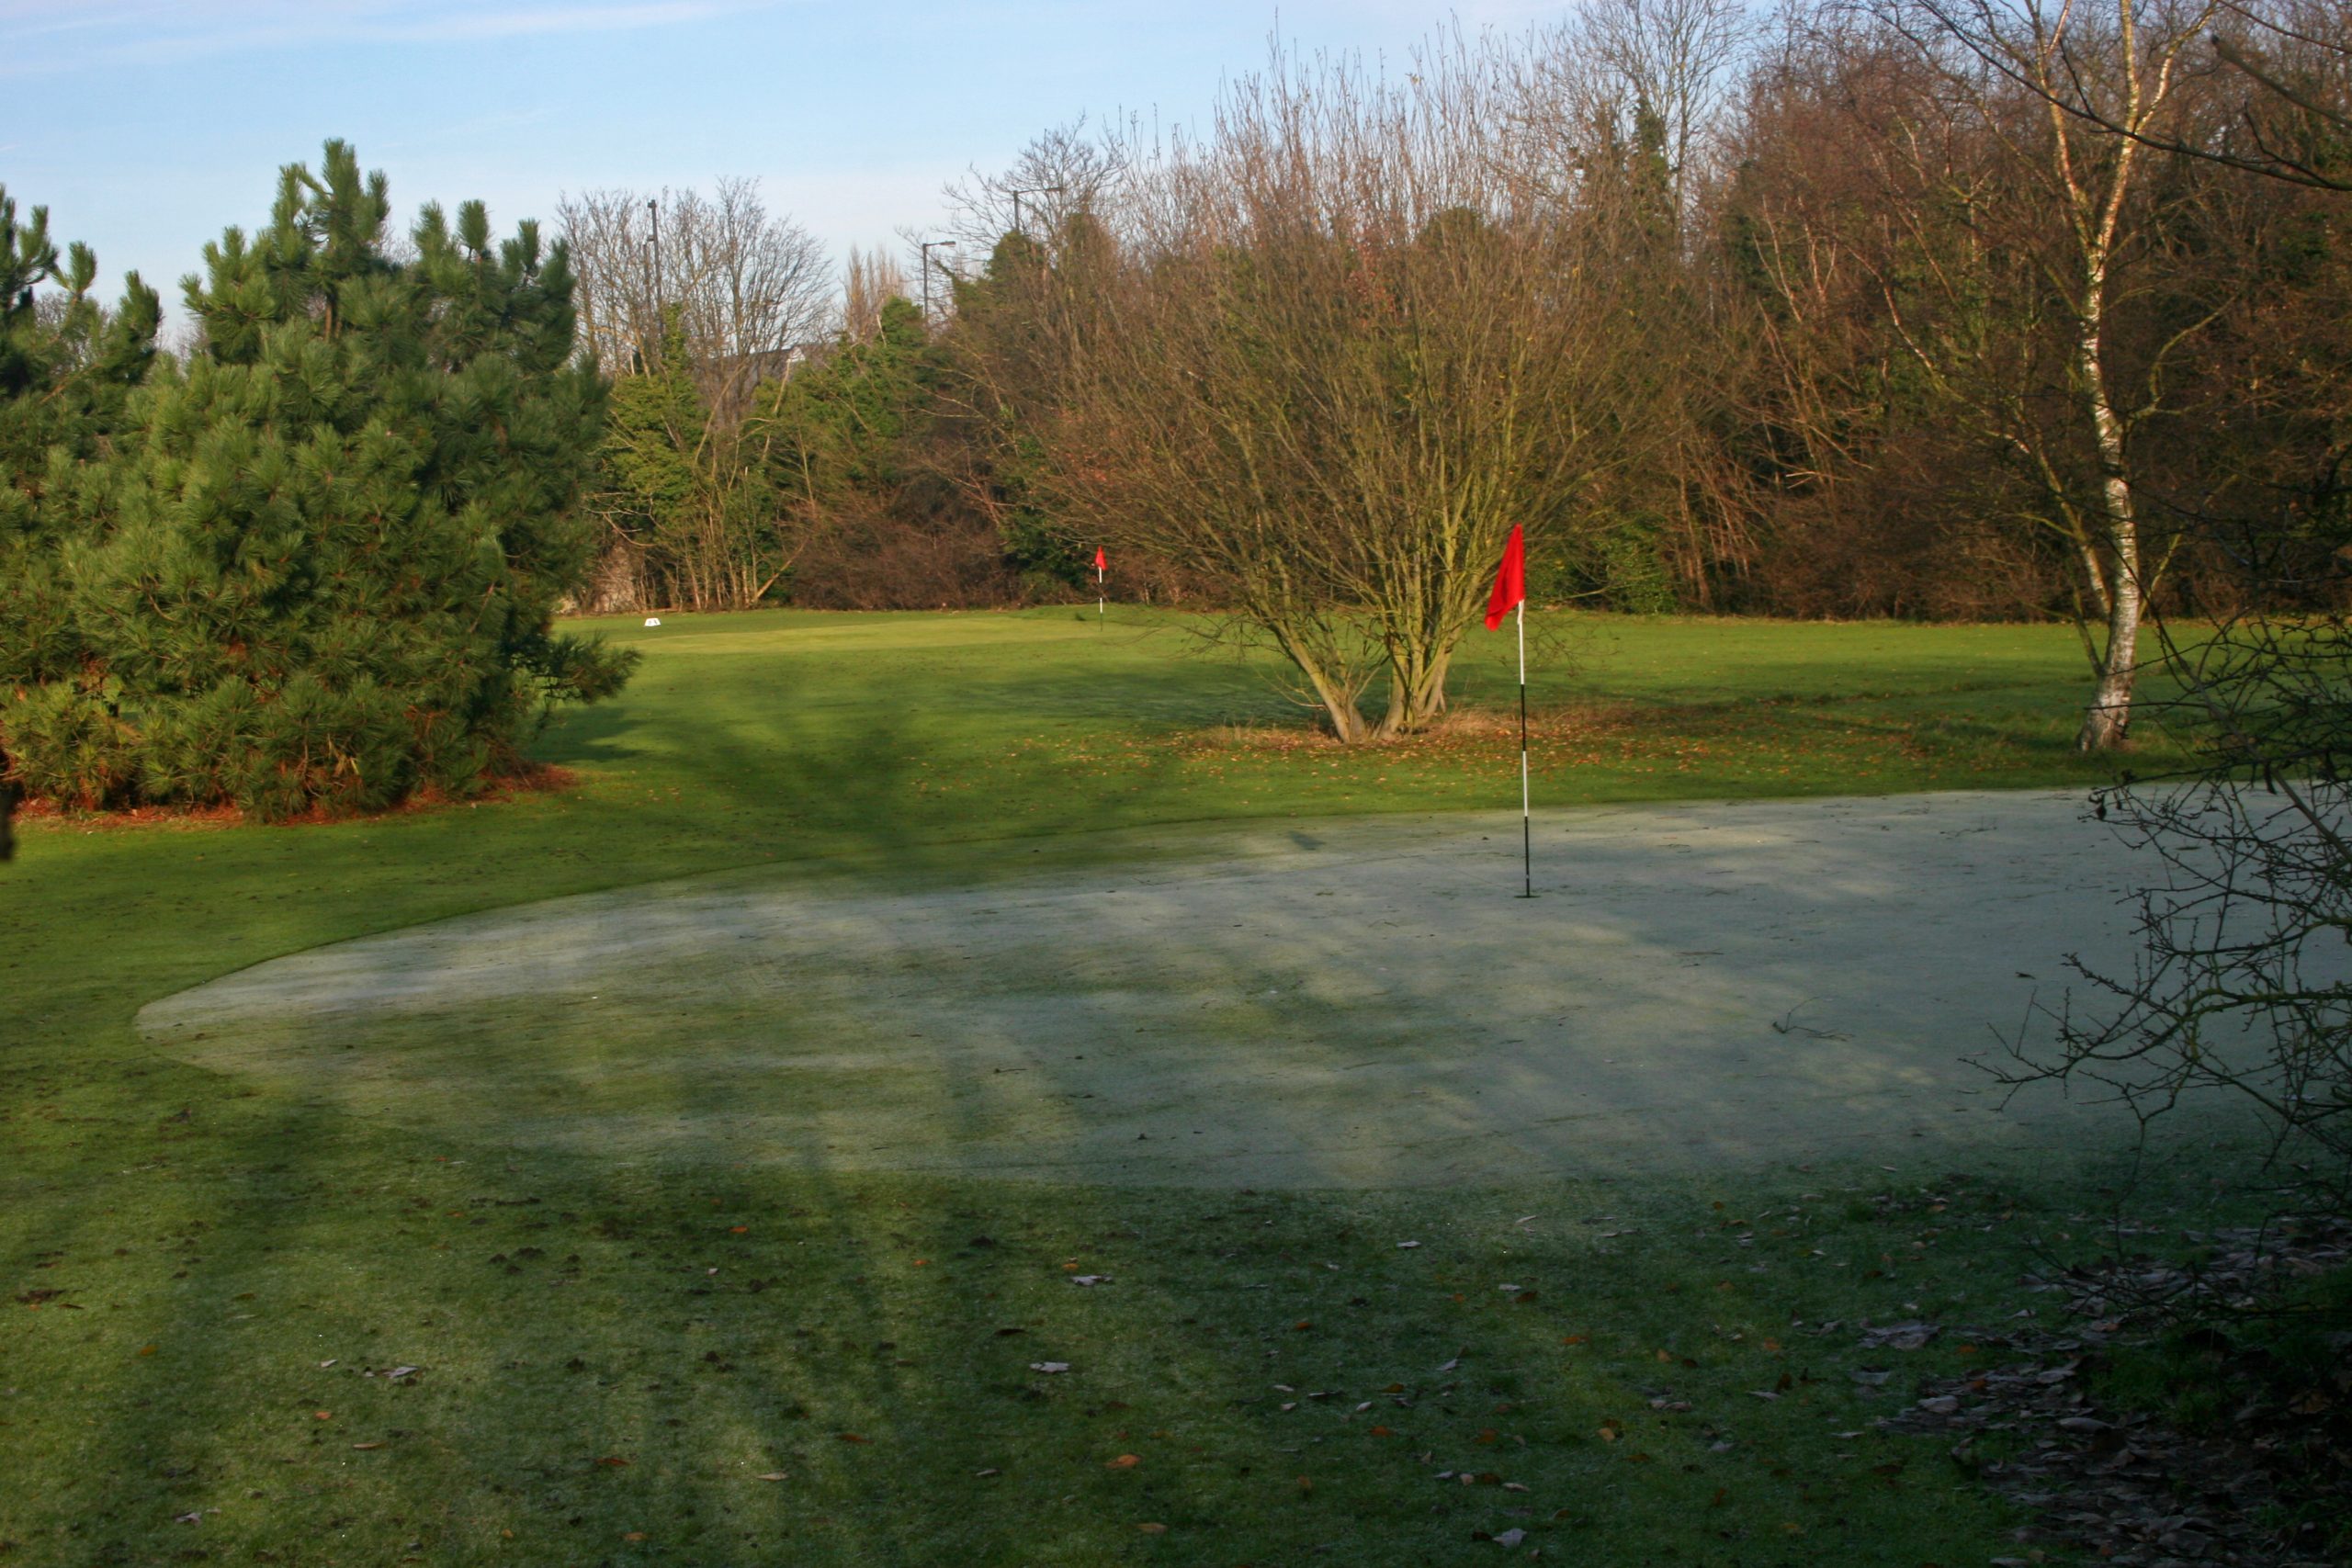 golf greens with red flag and dusting of snow